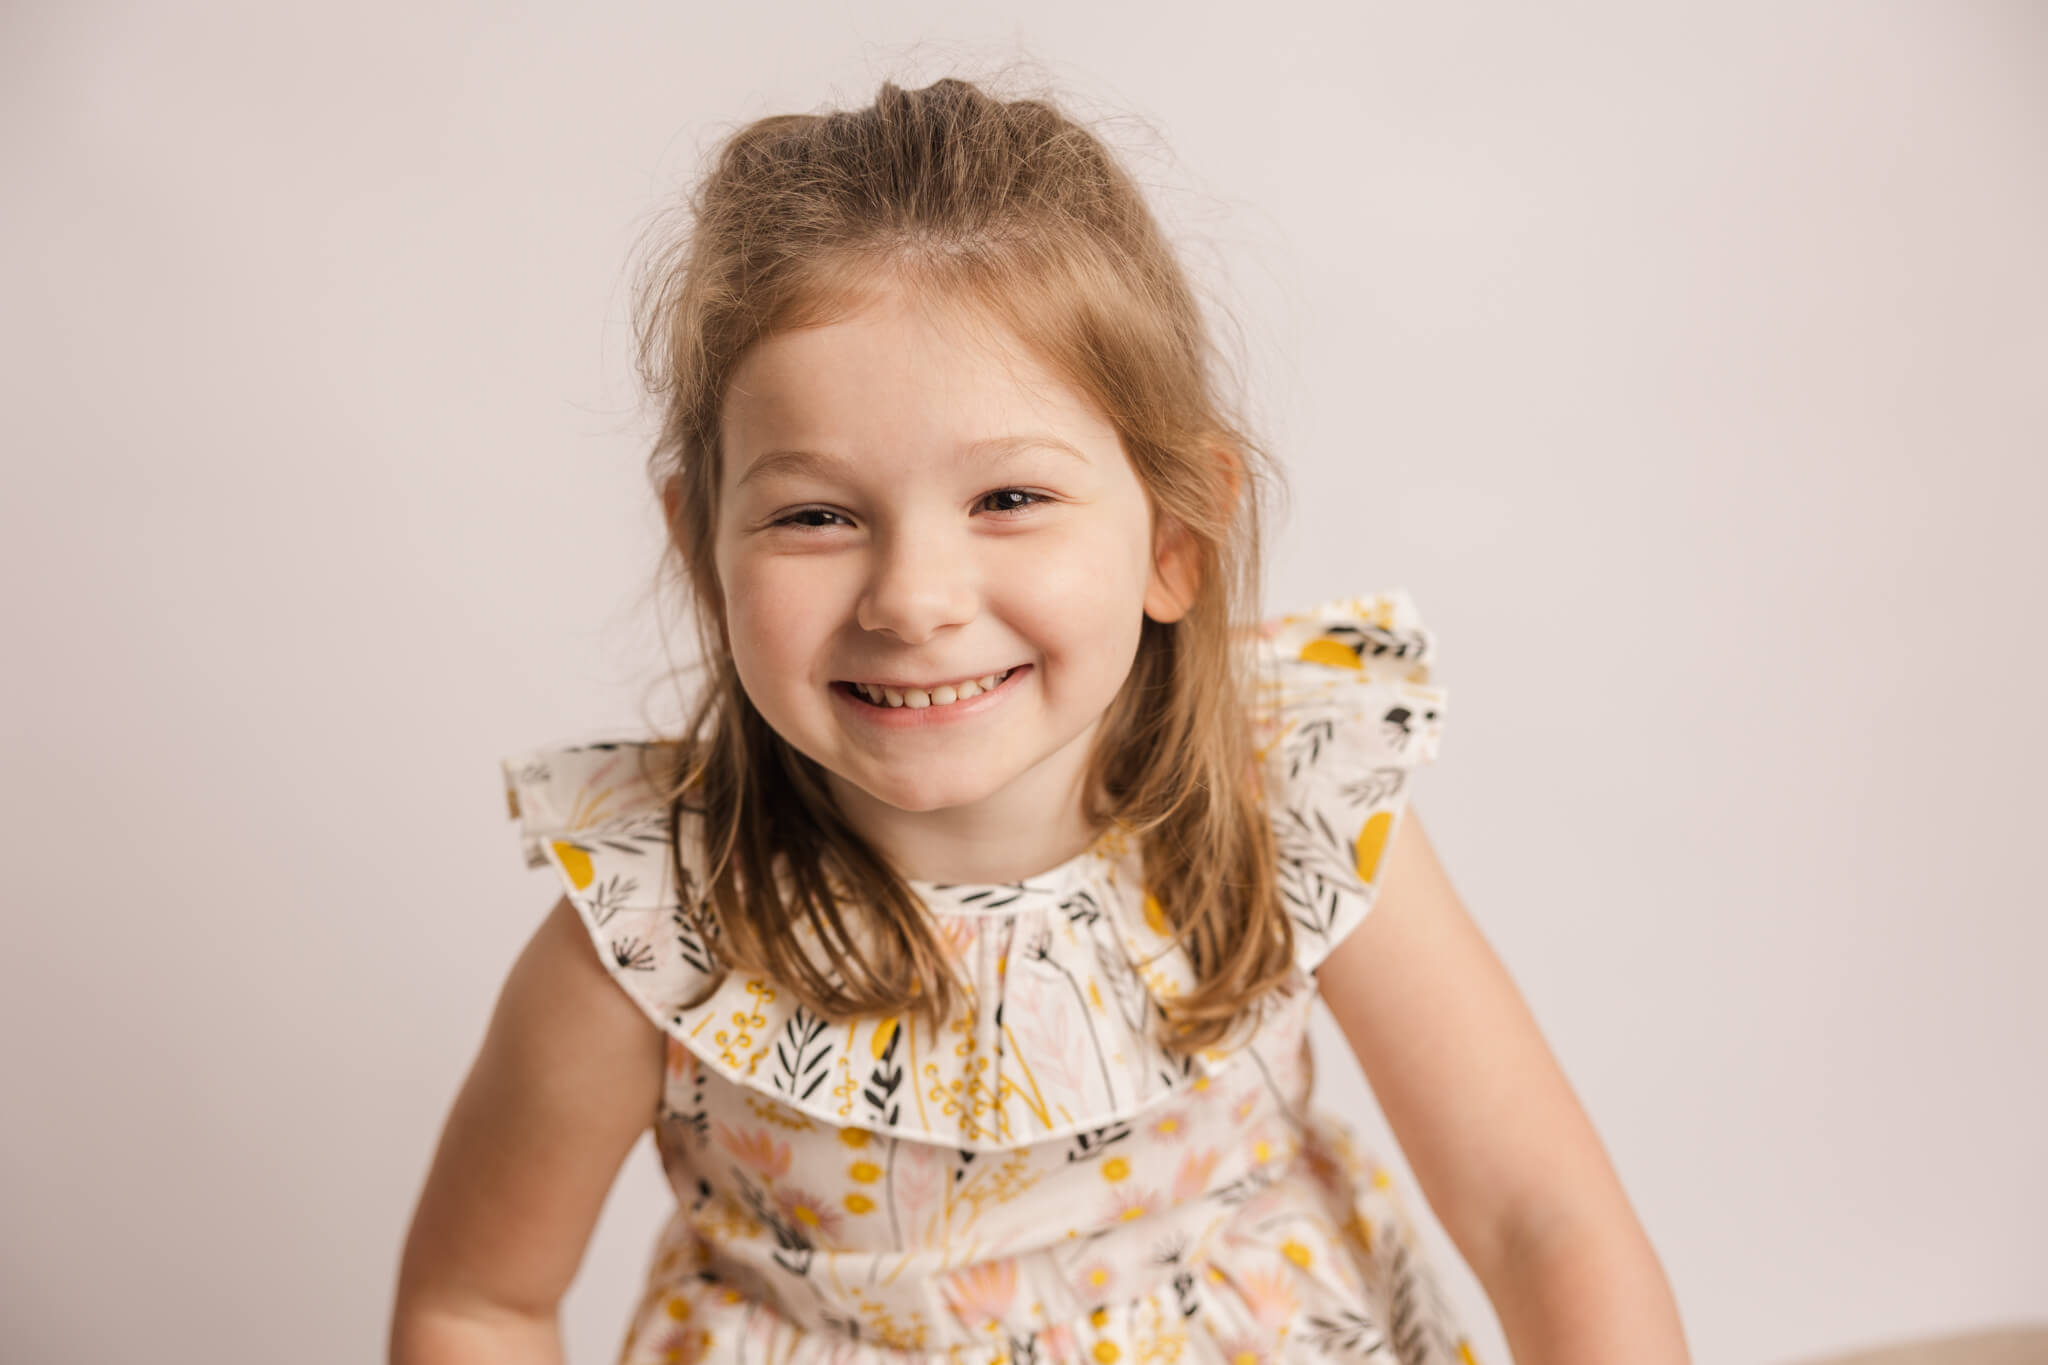 6 year old girl in the studio for milestone portraits captured by molly berry photography